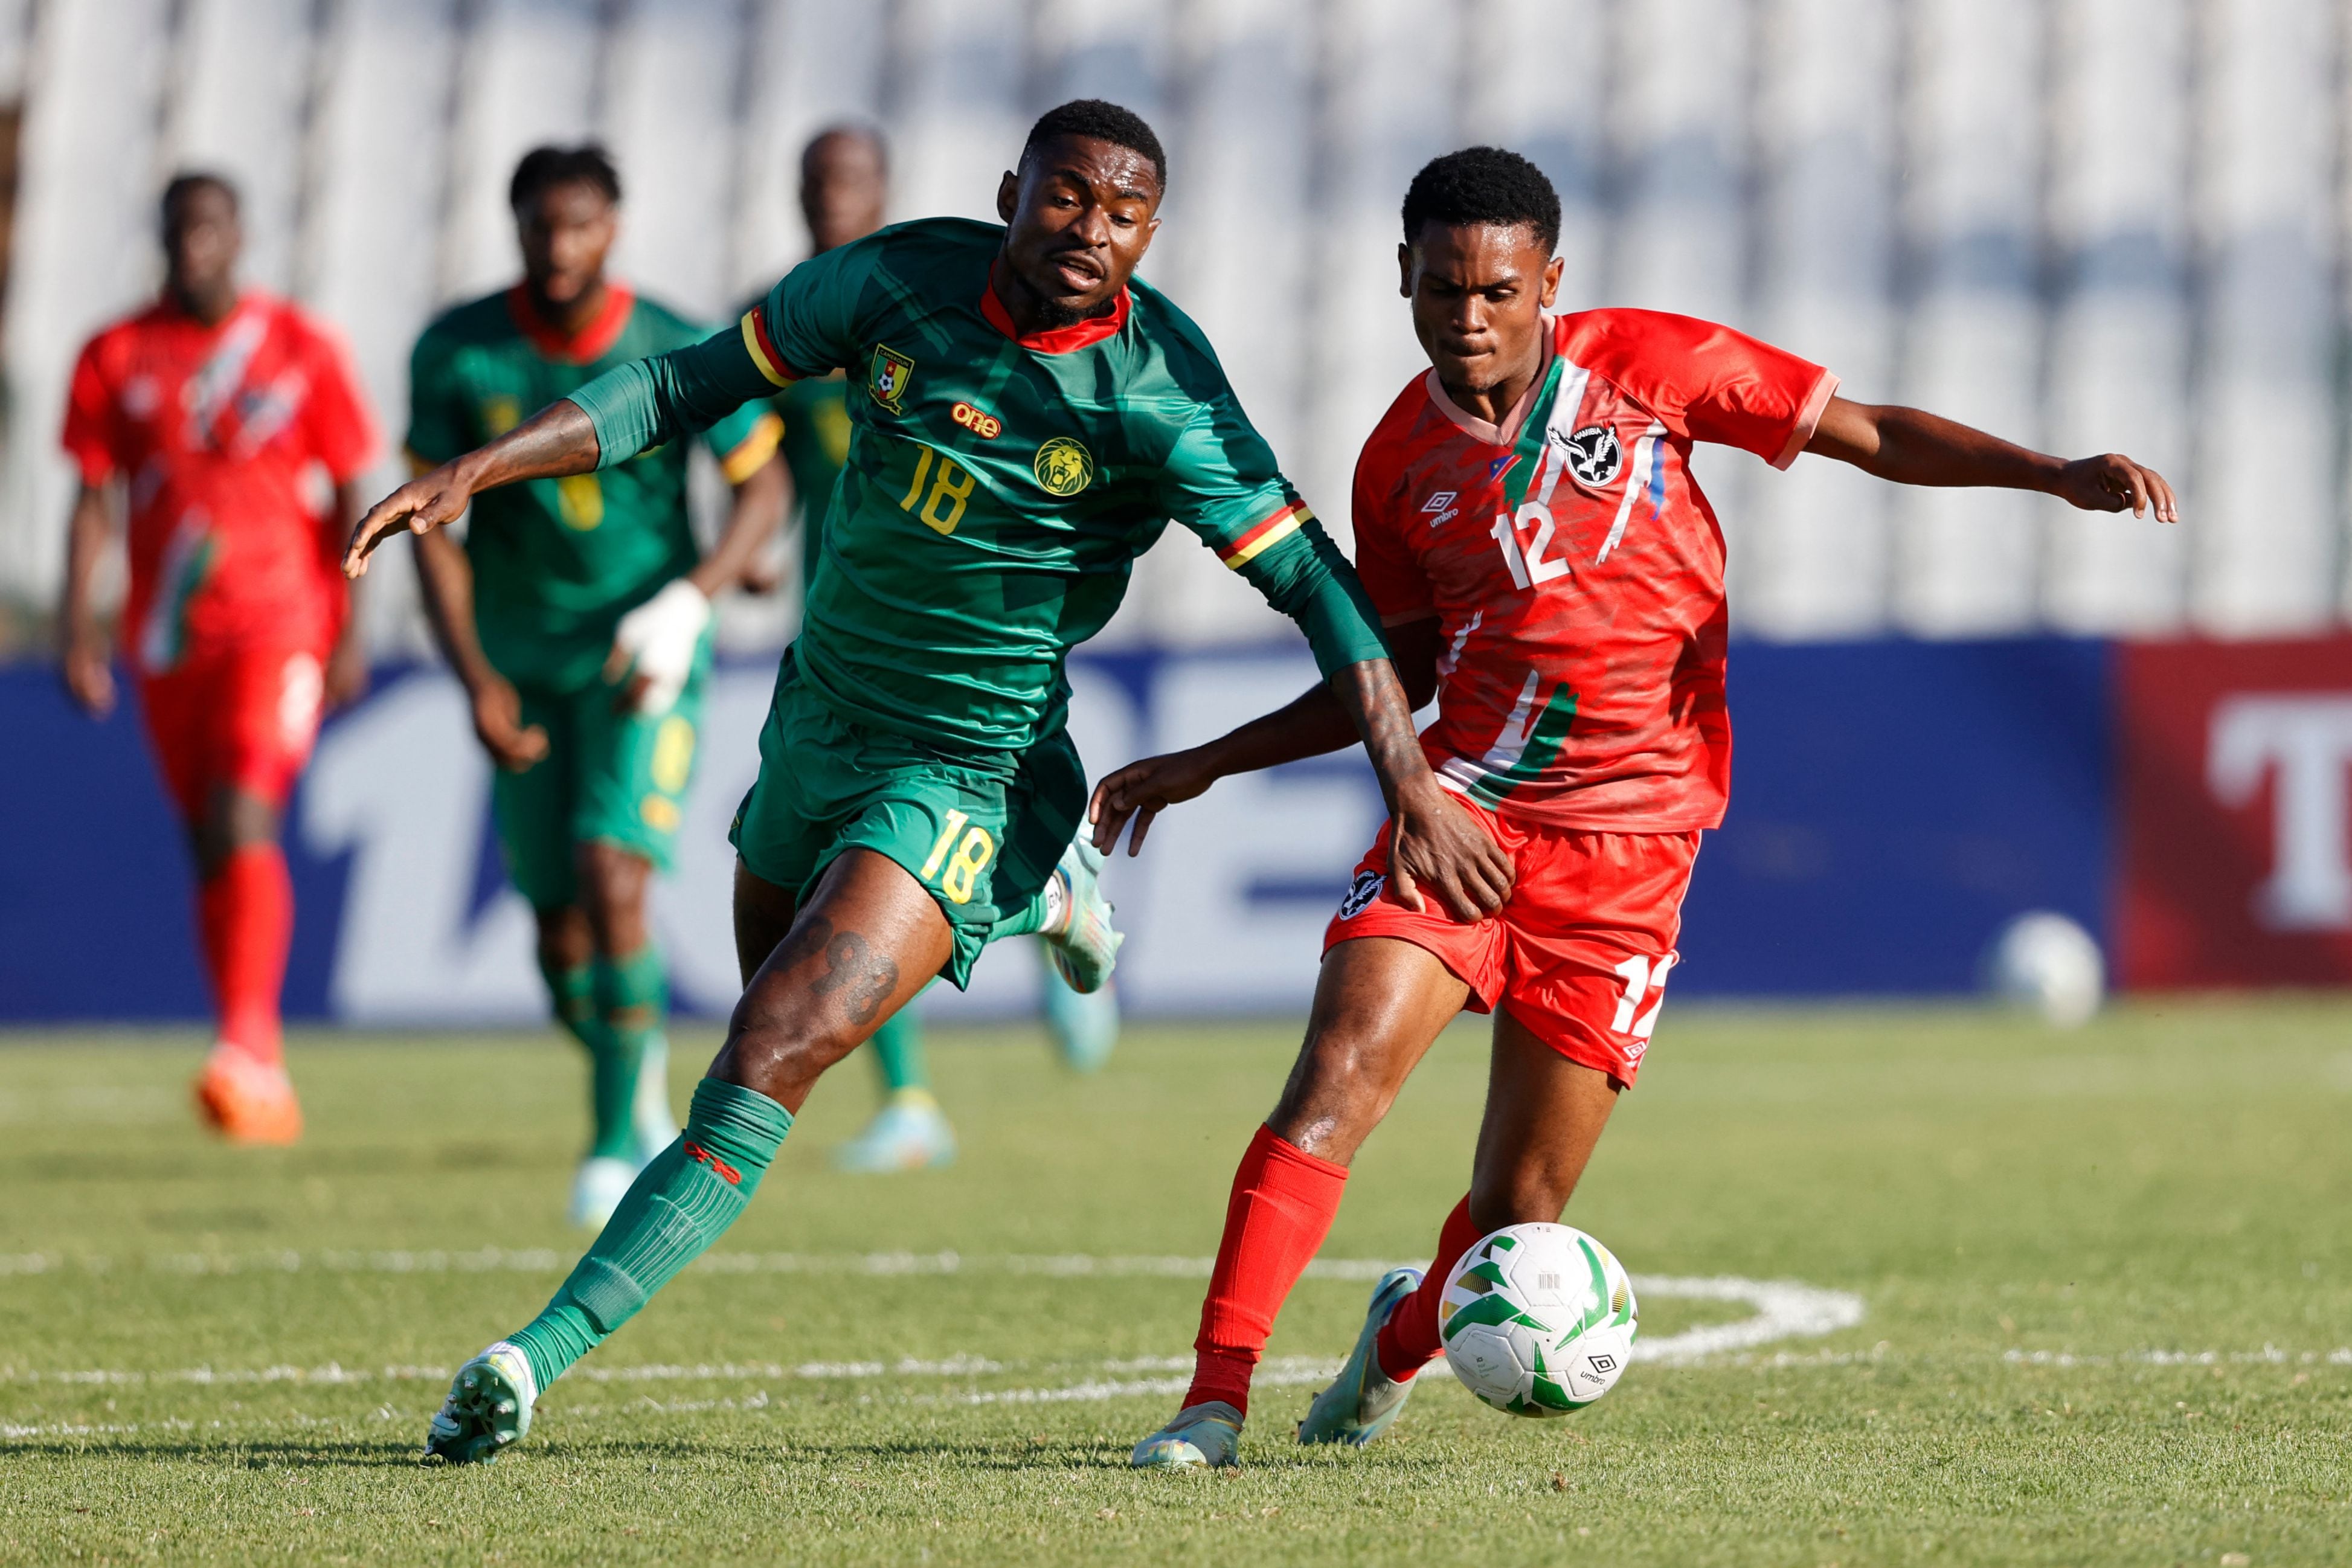 Namibia's Edmar Kamatuka (R) is challenged by Cameroon's Martin Hongla (L) during the 2023 Africa Cup of Nations (CHAN) Group C qualifier match between Namibia and Cameroon at the Dobsonville Stadium in Soweto on March 28, 2023. (Photo by PHILL MAGAKOE / AFP)